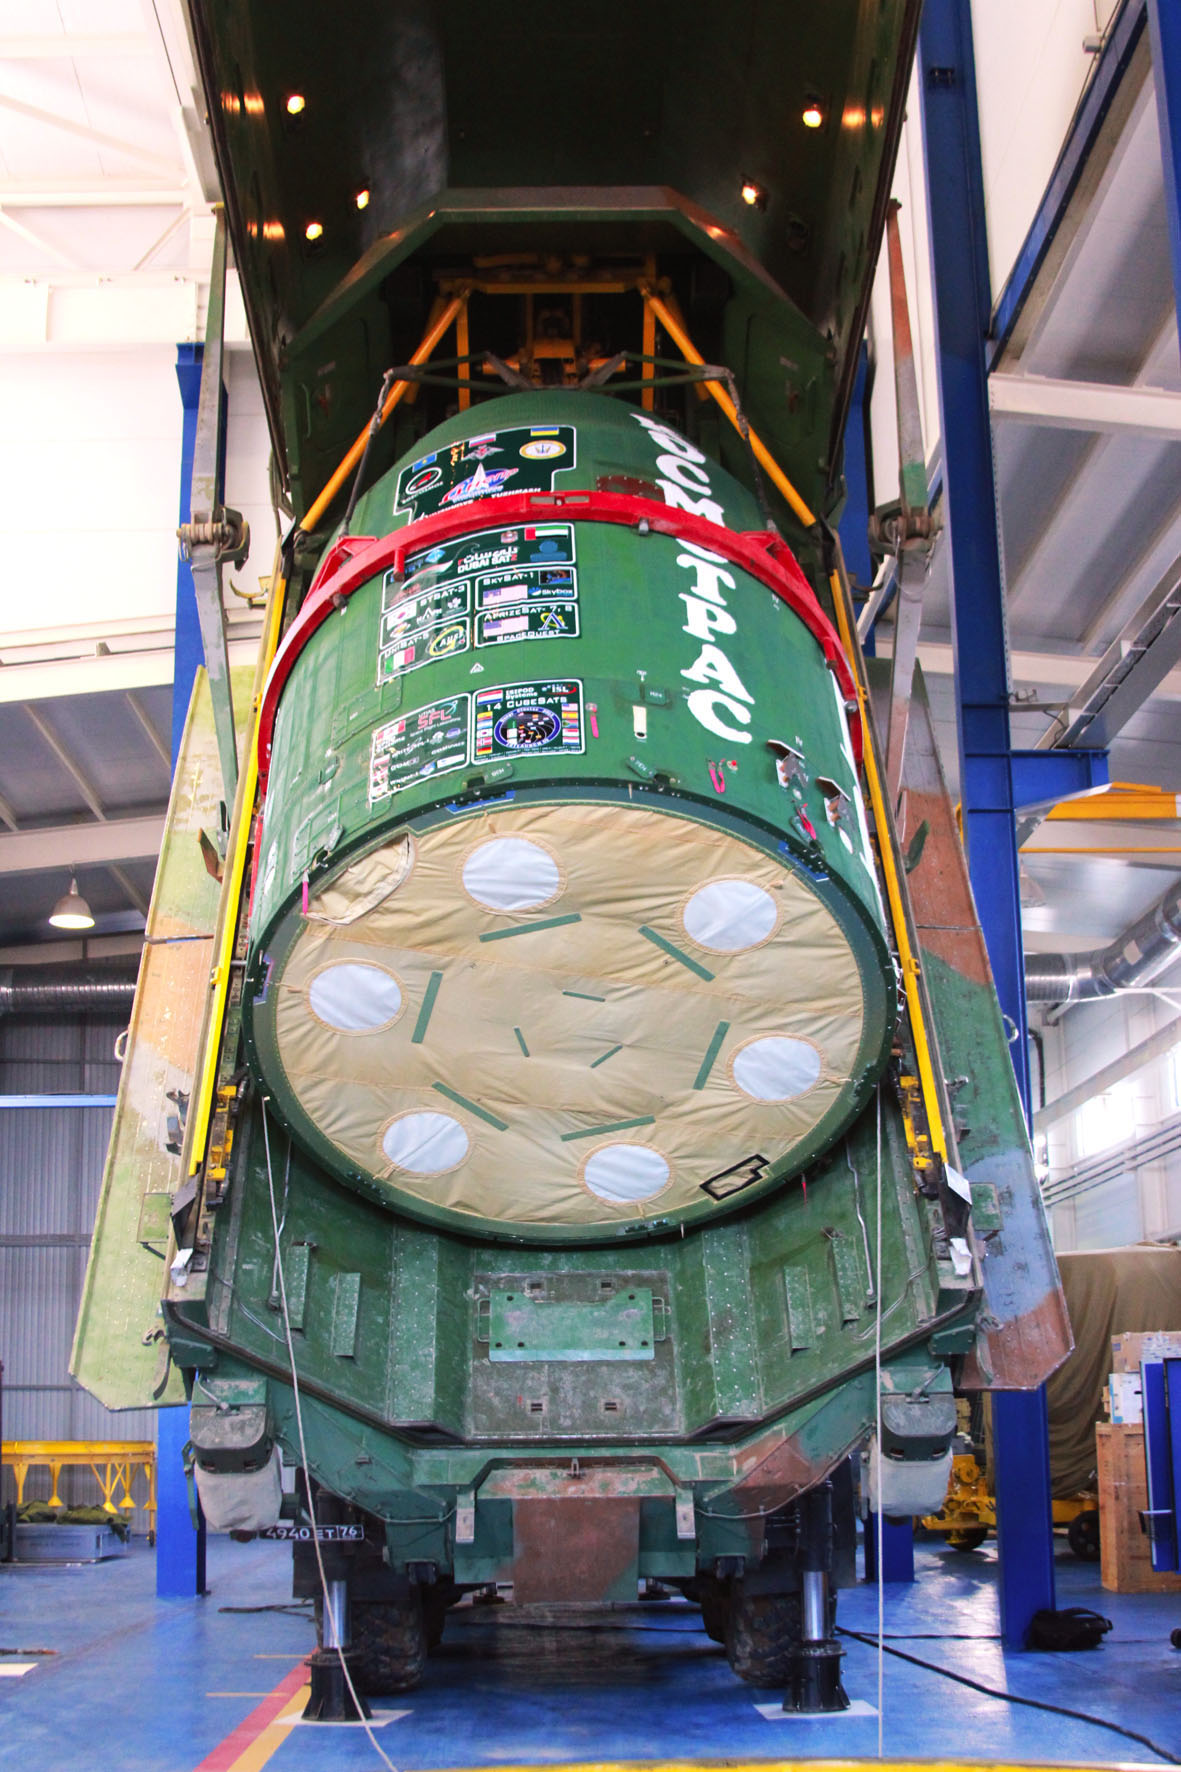 The Space Head Module (SHM) is prepared for installation atop the Dnepr launch vehicle for the forthcoming flight of a record-breaking 32 satellites. Photo Credit: ISC Kosmotras